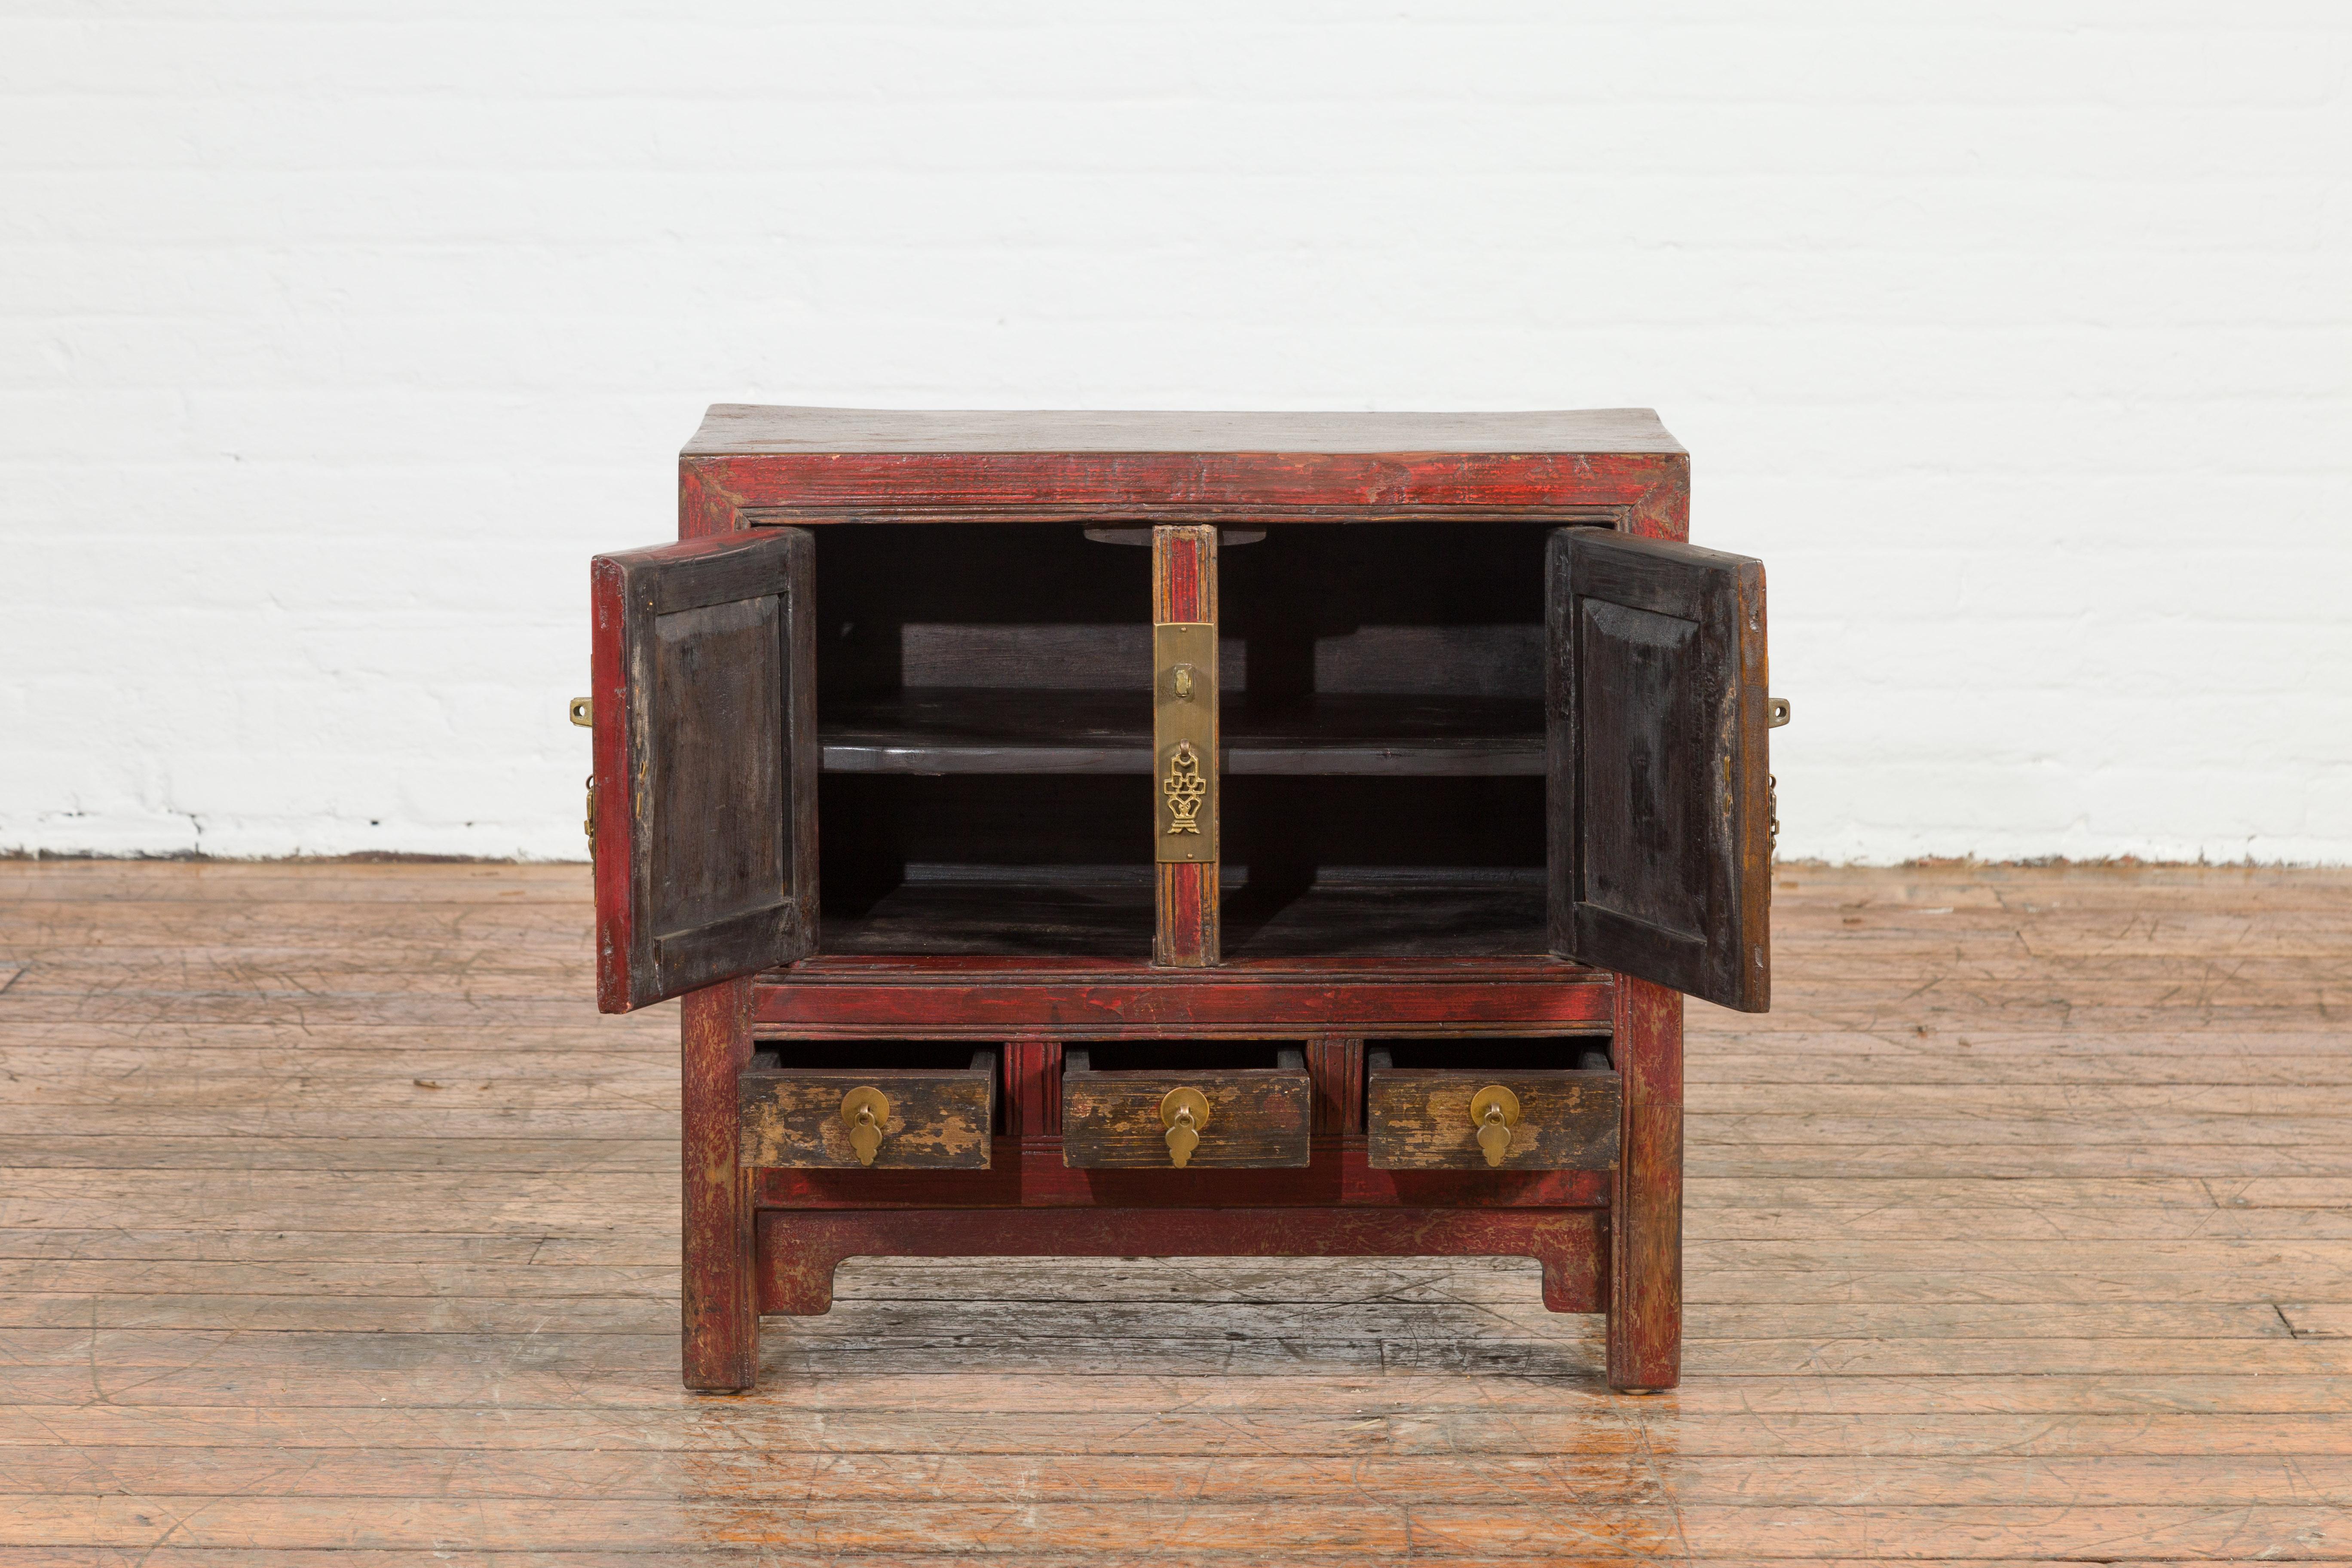 Chinese Qing Dynasty 19th Century Red Lacquer Cabinet with Painted Fruit Baskets For Sale 2